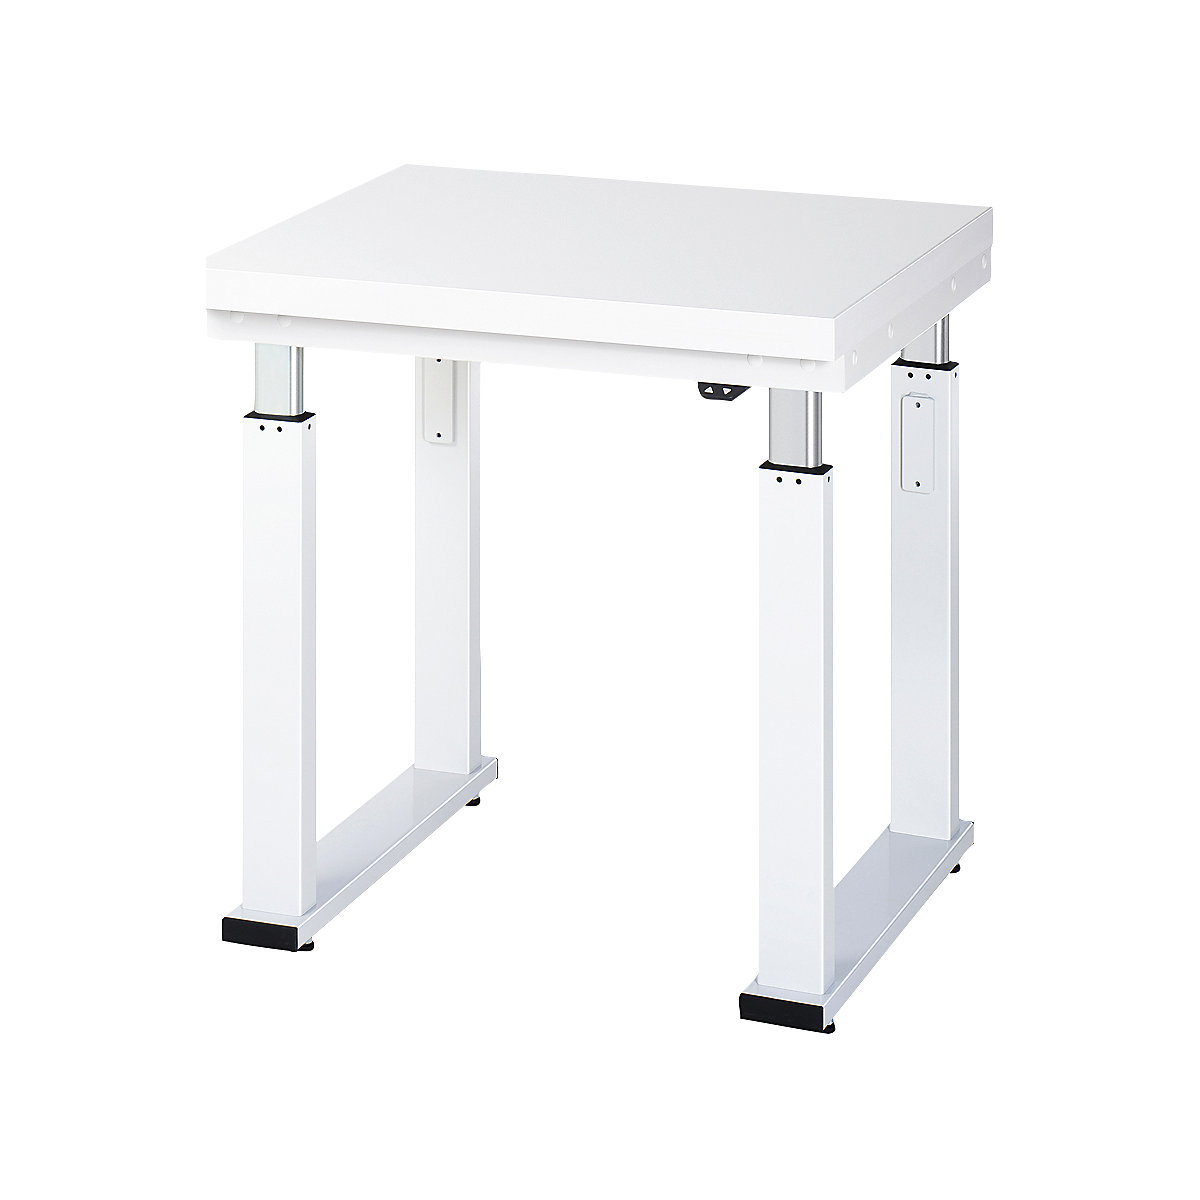 Work table, electric height adjustment – RAU, hardened laminate worktop, max. load 600 kg, WxD 750 x 700 mm-9